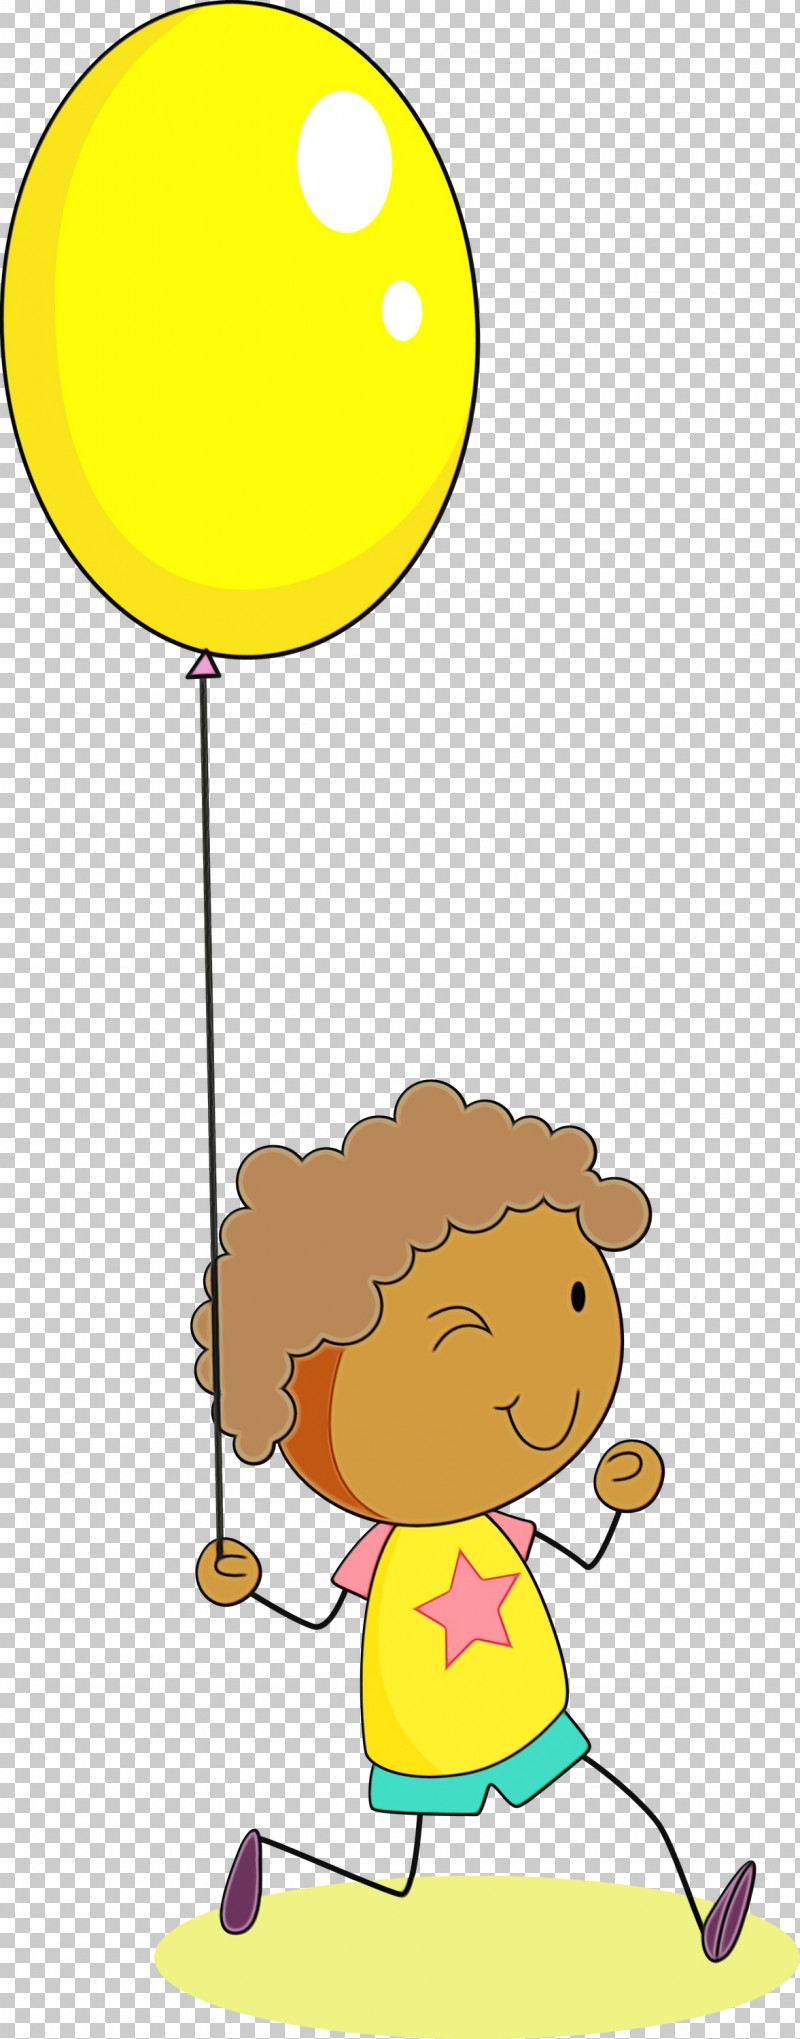 Yellow Cartoon Party Supply Balloon Happy PNG, Clipart, Balloon, Cartoon, Happy, Paint, Party Supply Free PNG Download